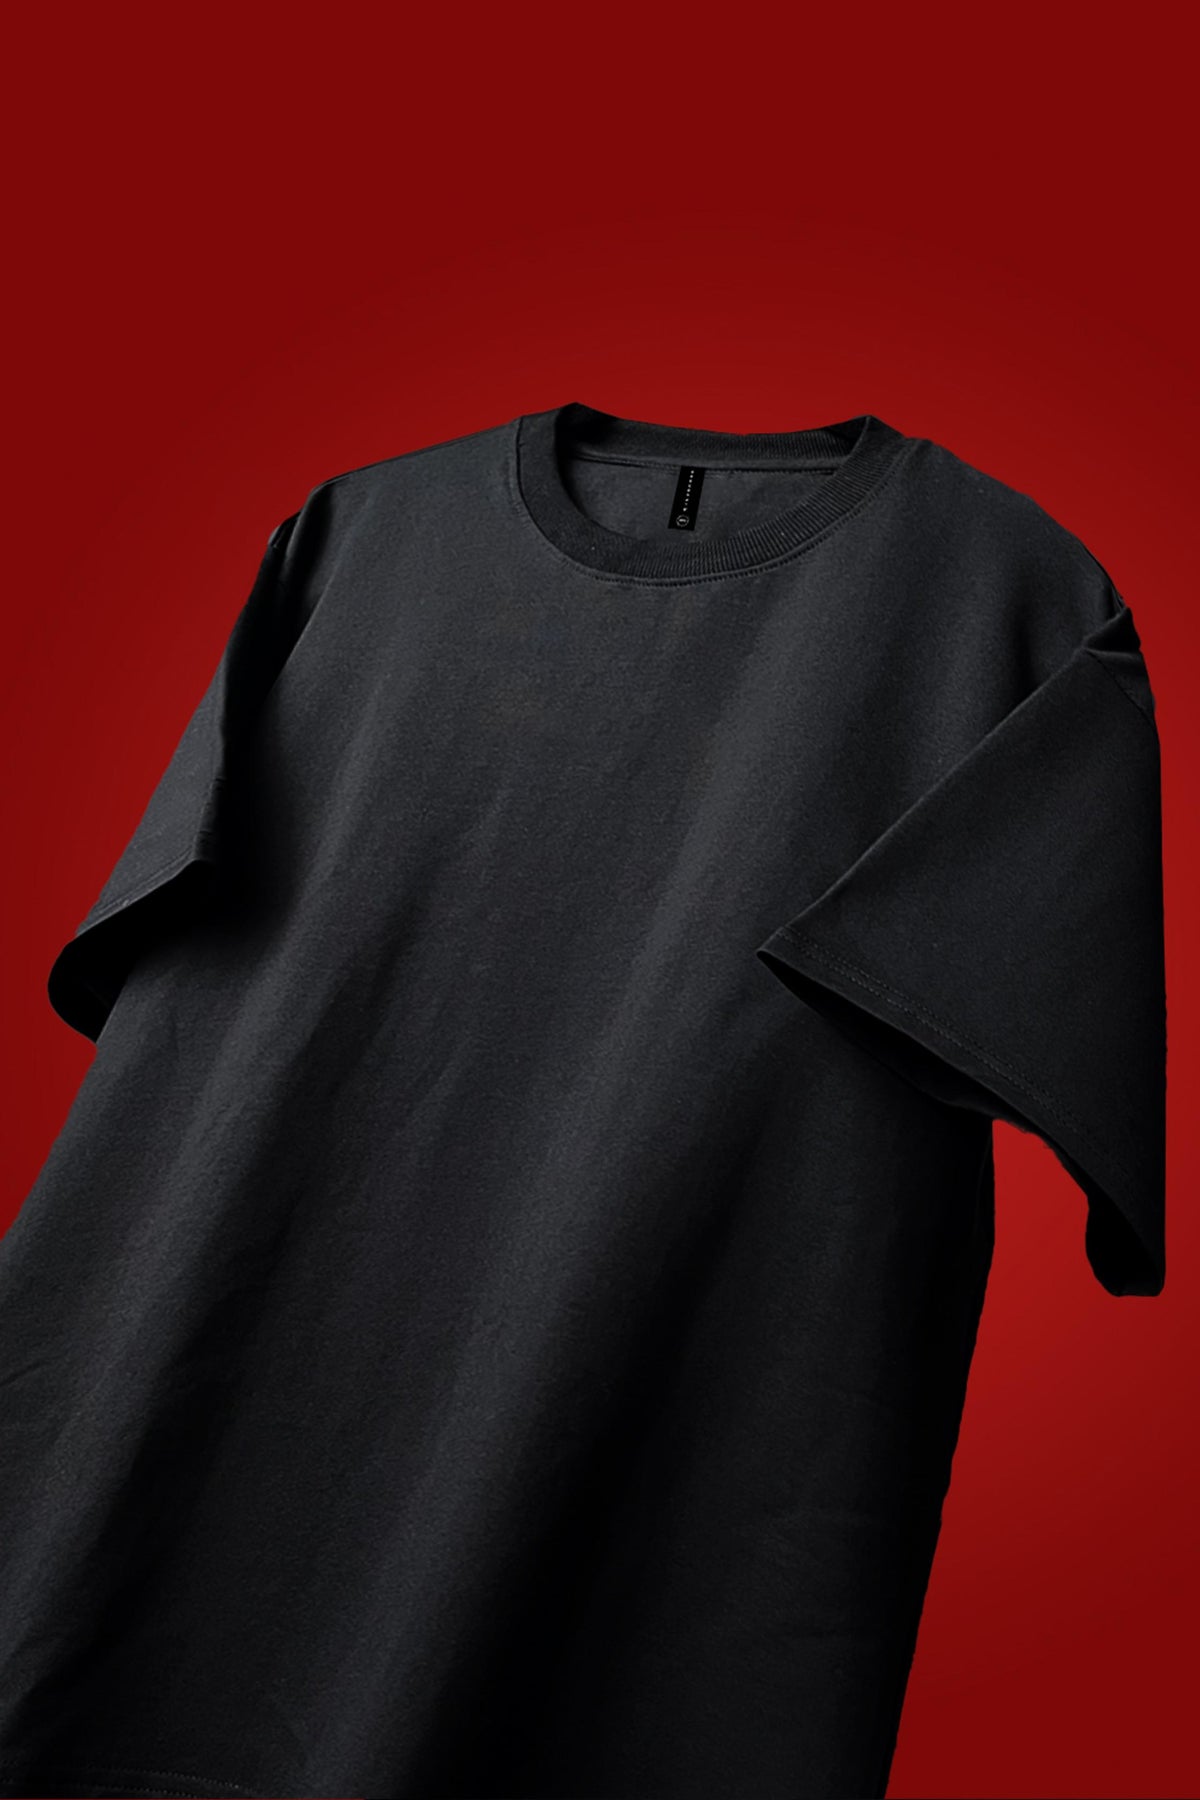 BLACK OVERSIZED T-SHIRT - Shop Now - Checkmate Atelier